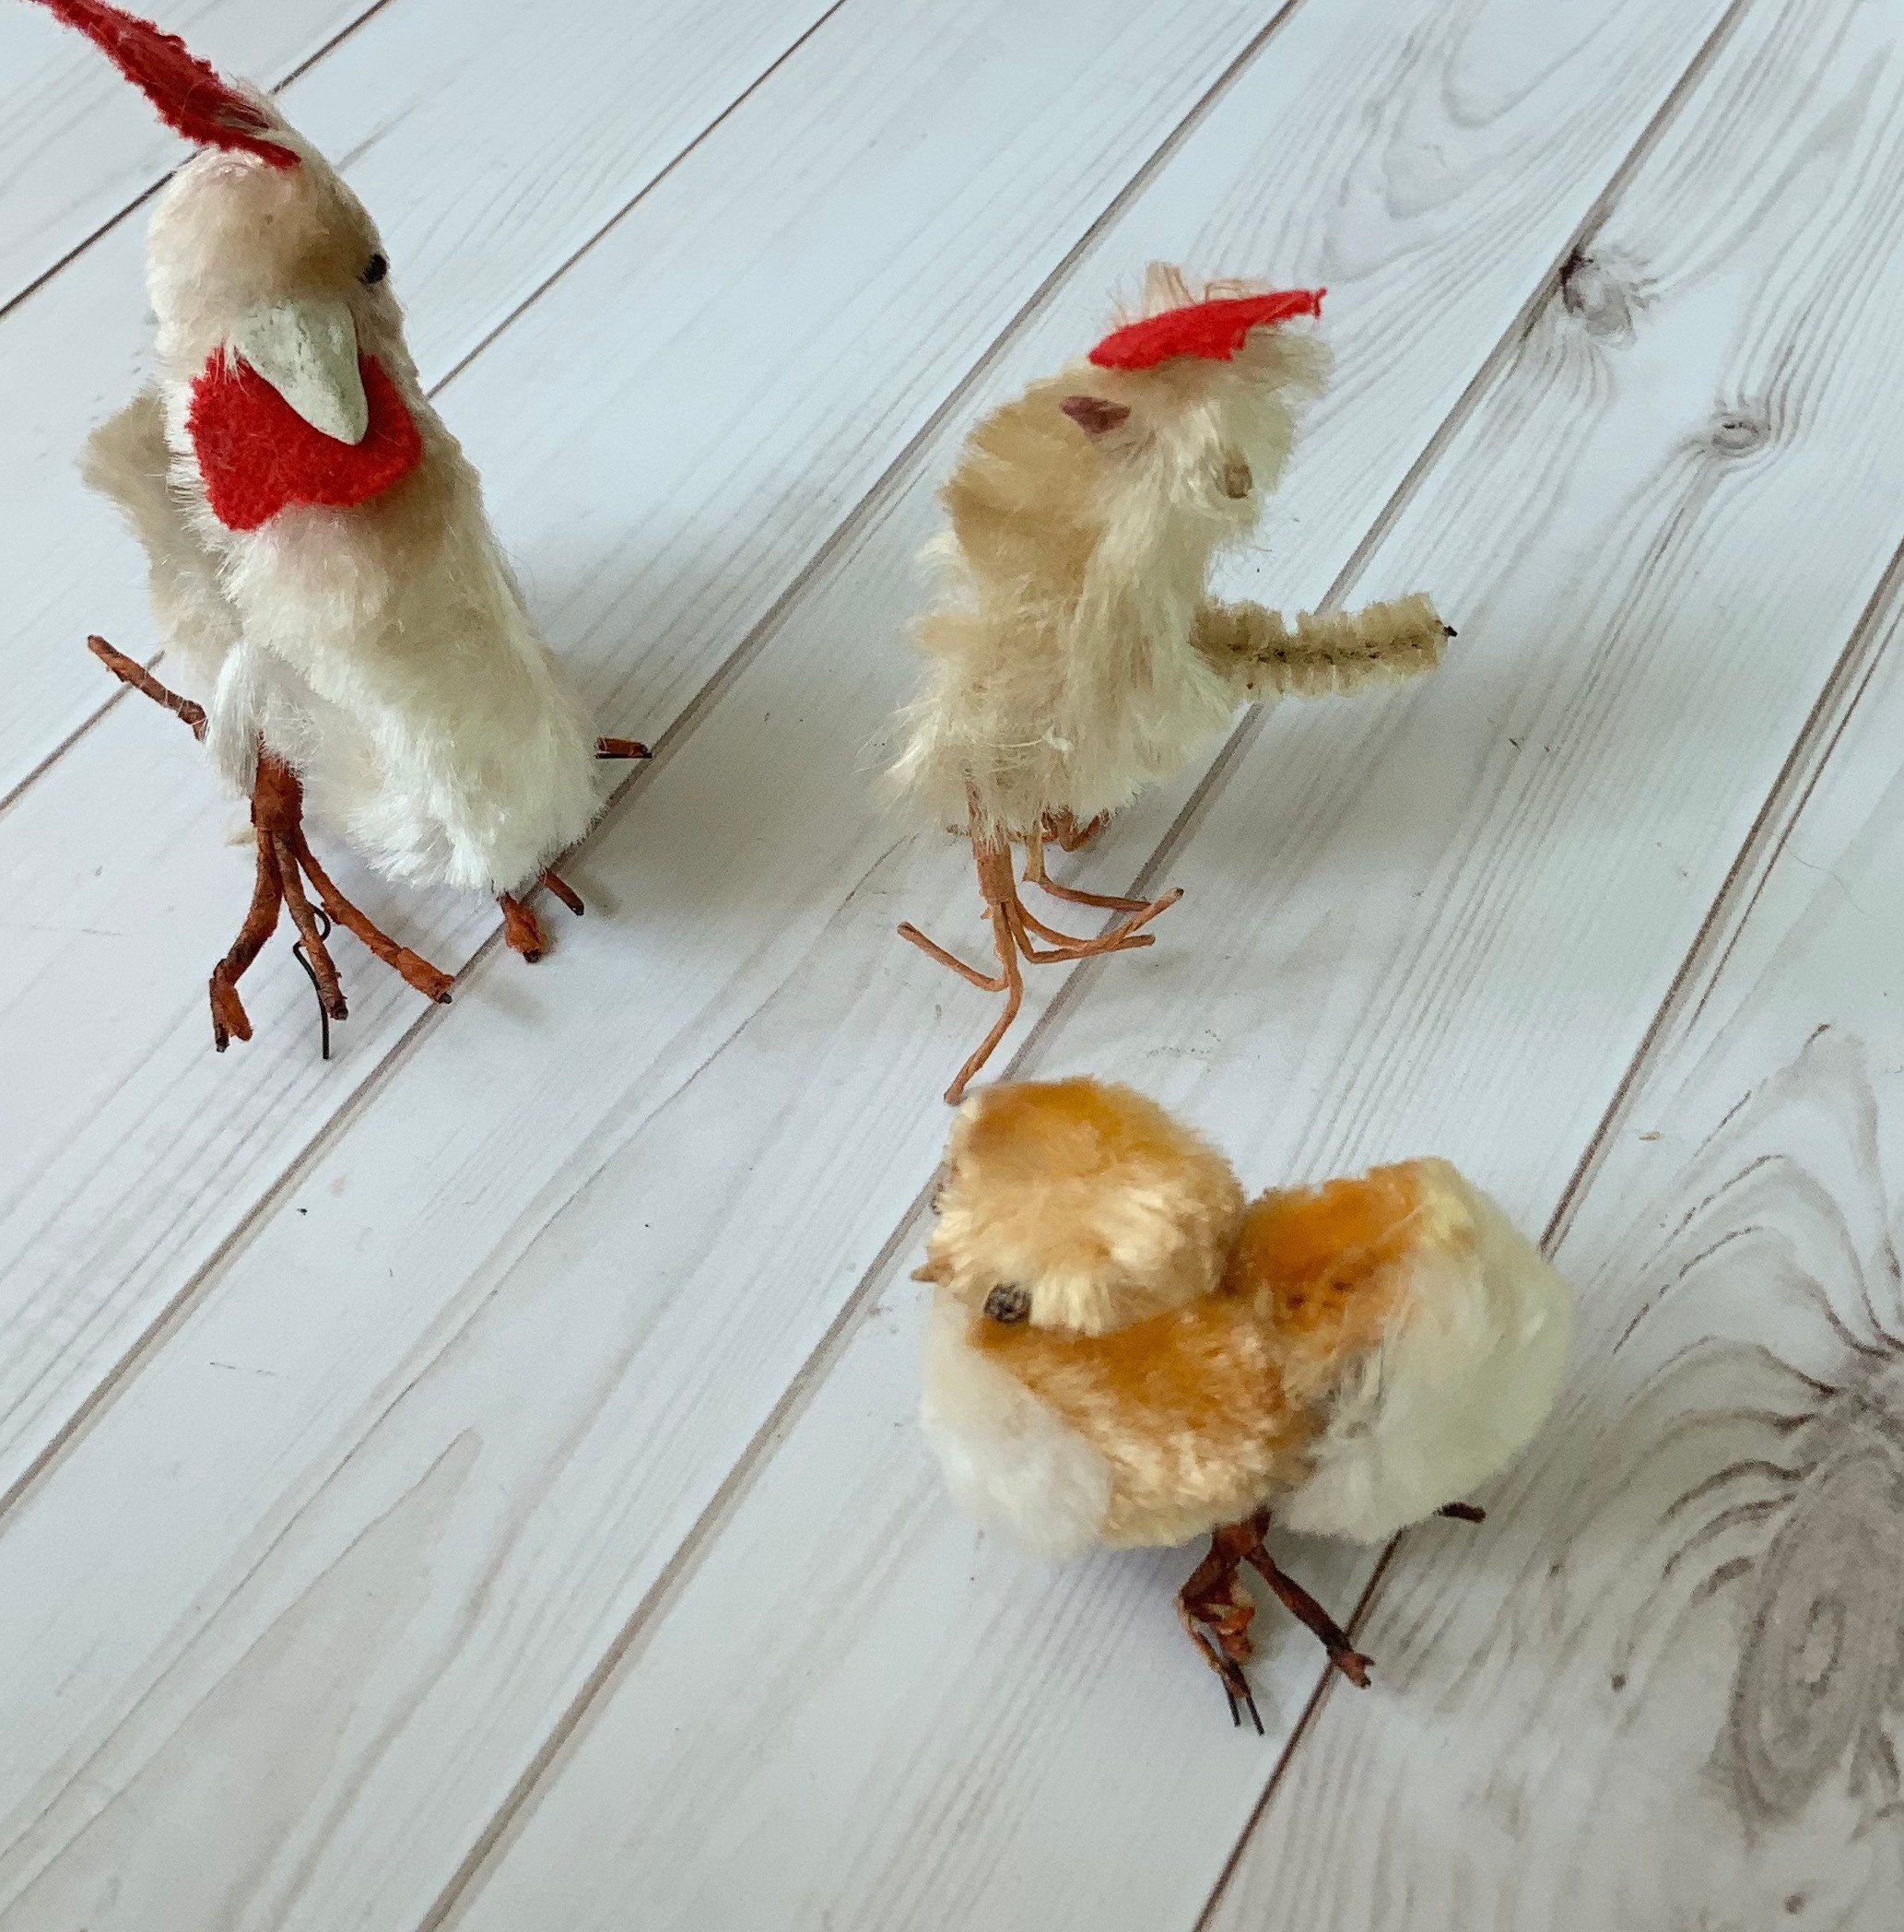 Large chicks Feathers Yellow Cotton Batting Vintage Pompom Chicks s 3 Easter Chicks Paper Covered Wire Feet Made in Japan